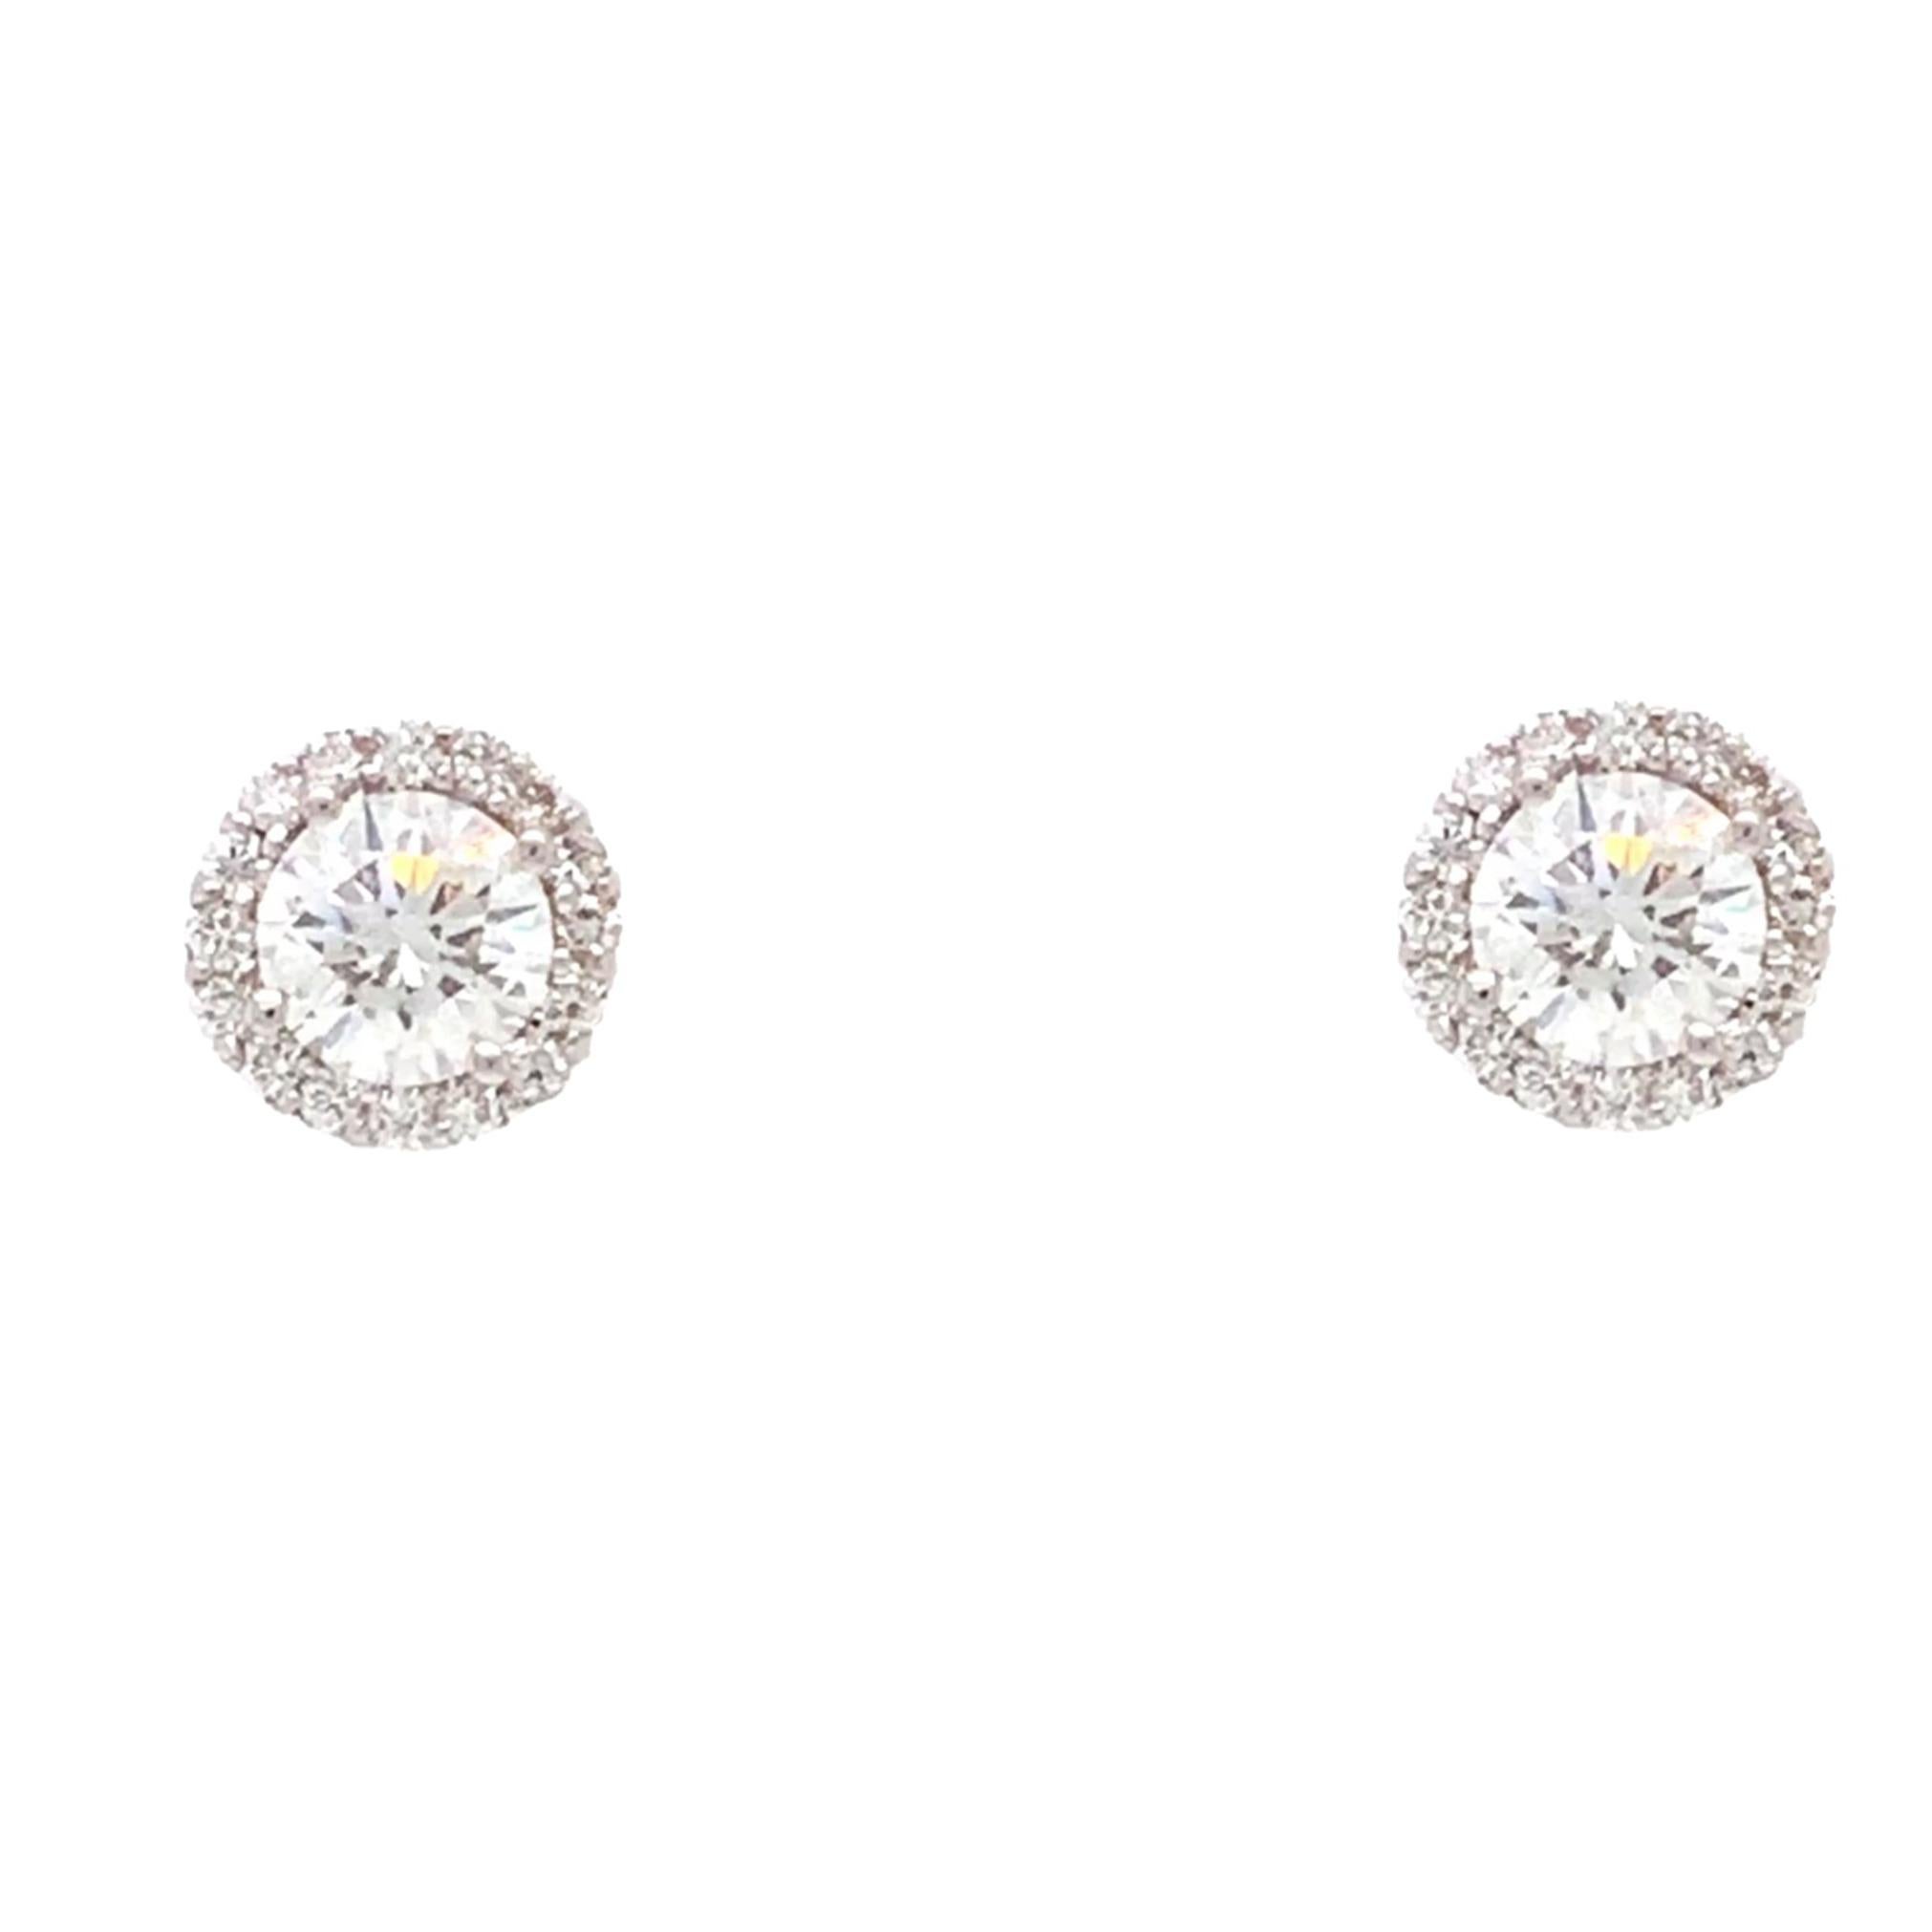 Art Deco Halo Stud Round Brilliant Cut Diamond Earrings 0.85cts T.W. 18k White Gold For Sale